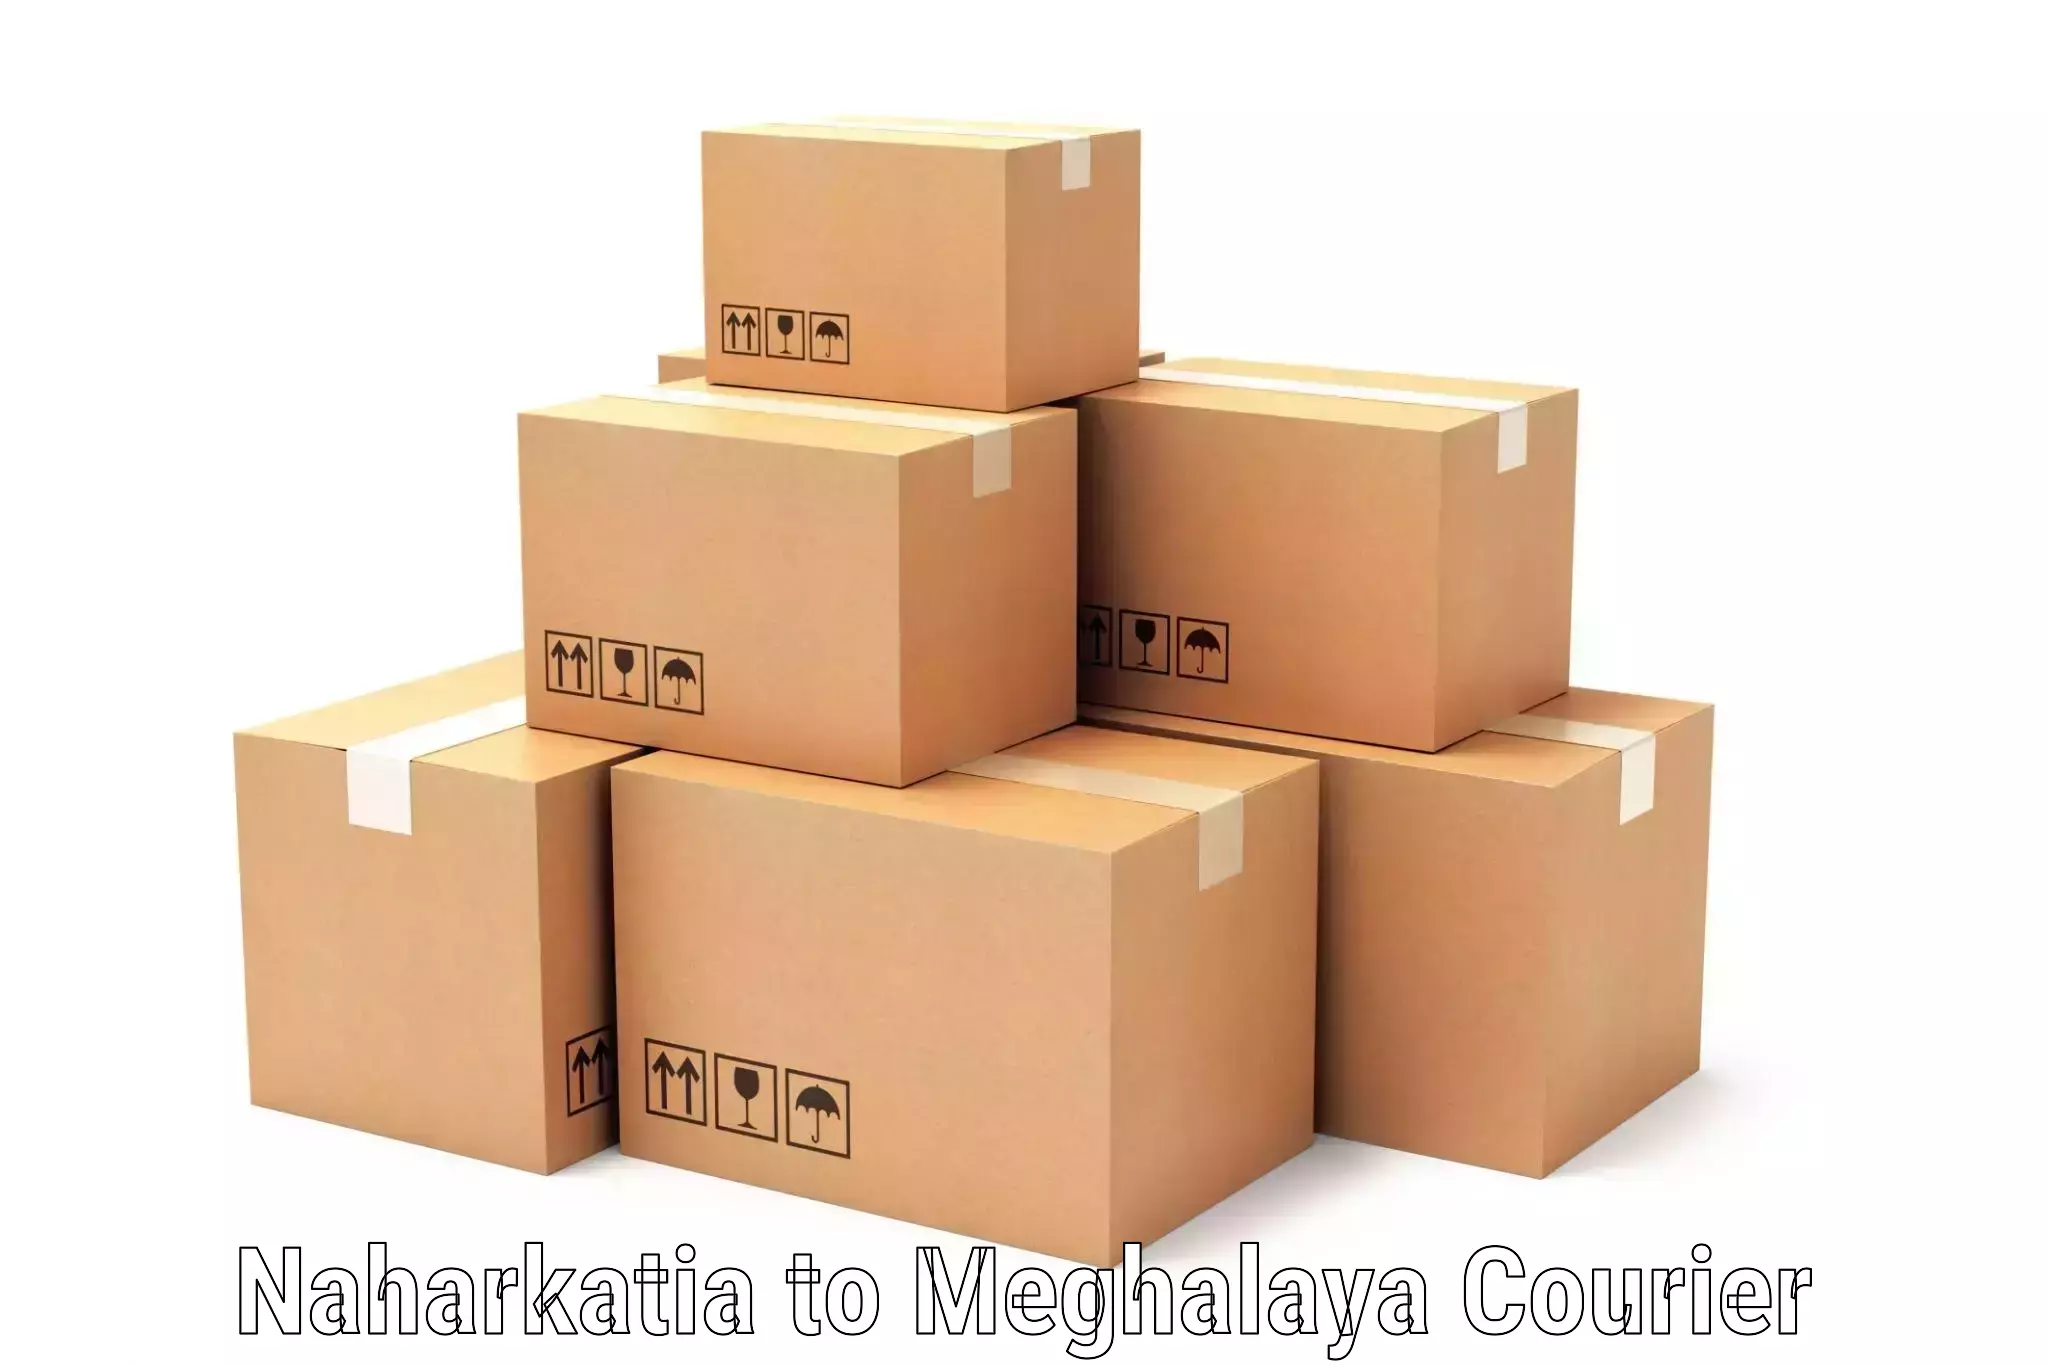 End-to-end delivery Naharkatia to Meghalaya